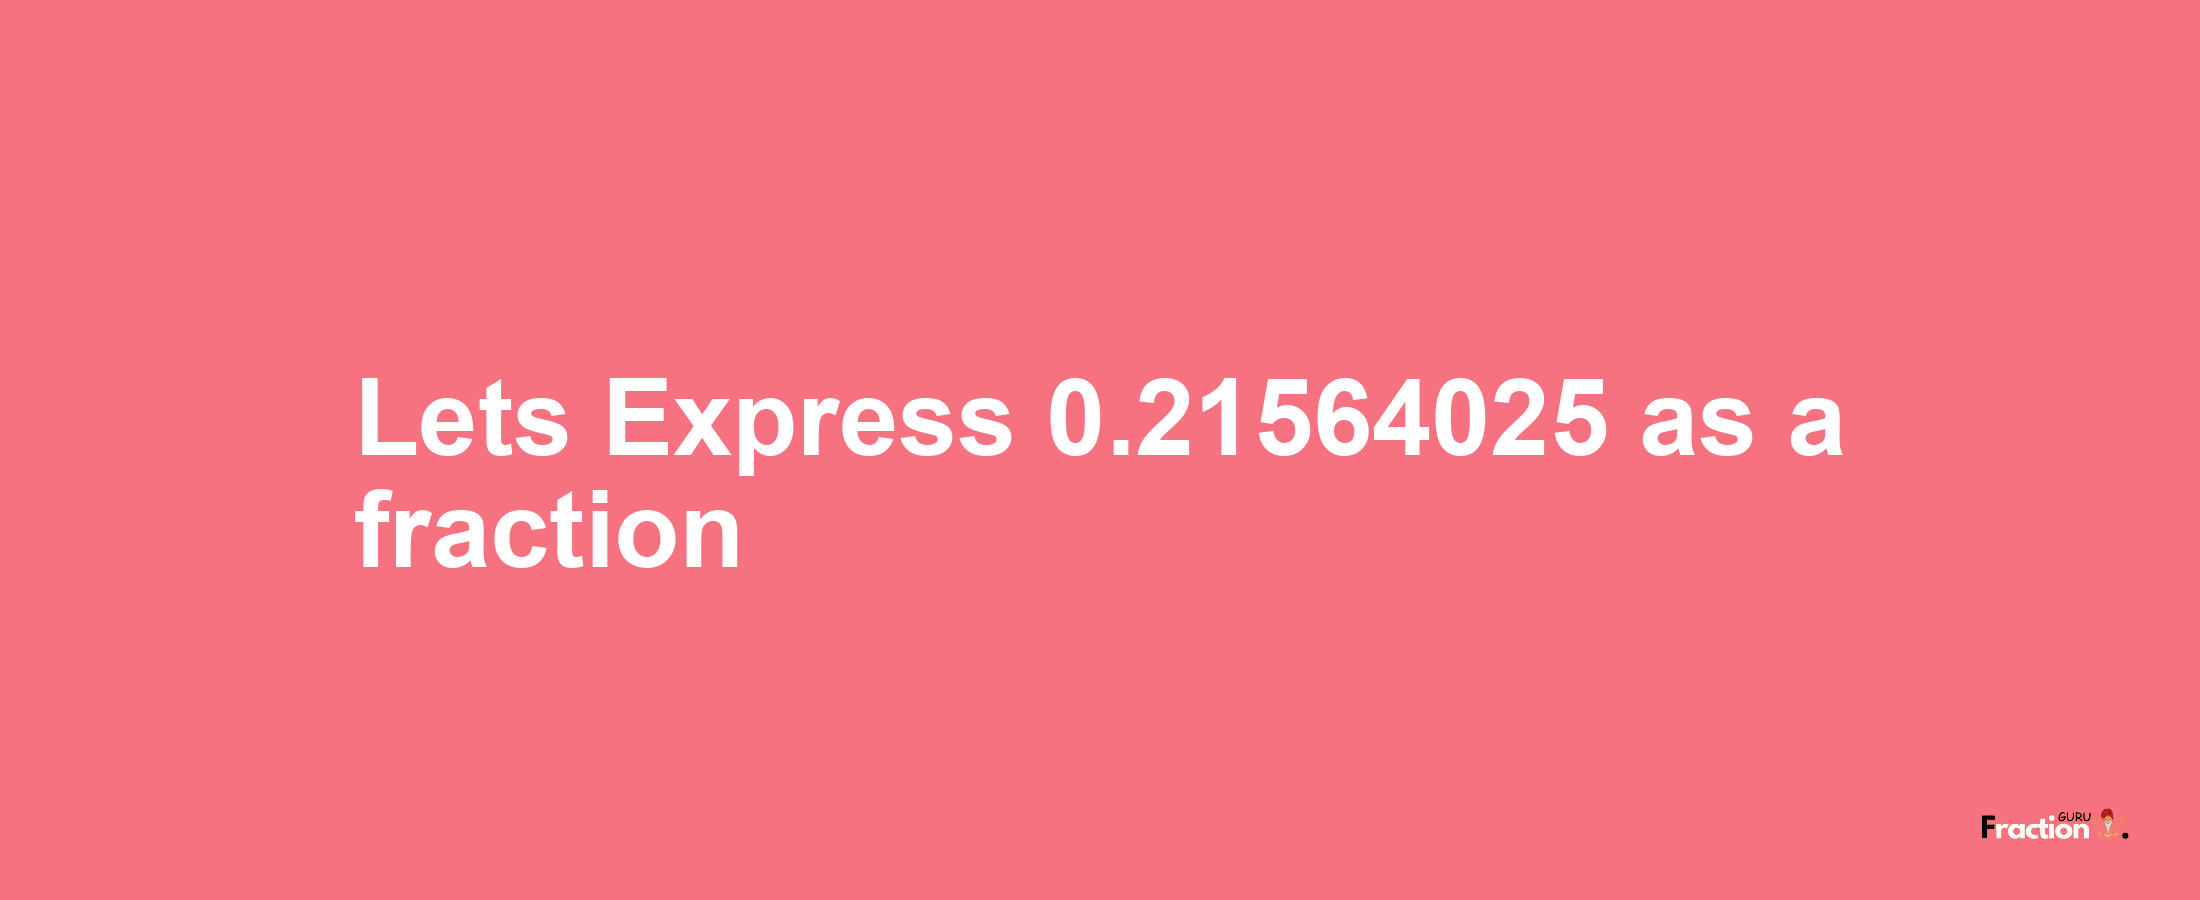 Lets Express 0.21564025 as afraction